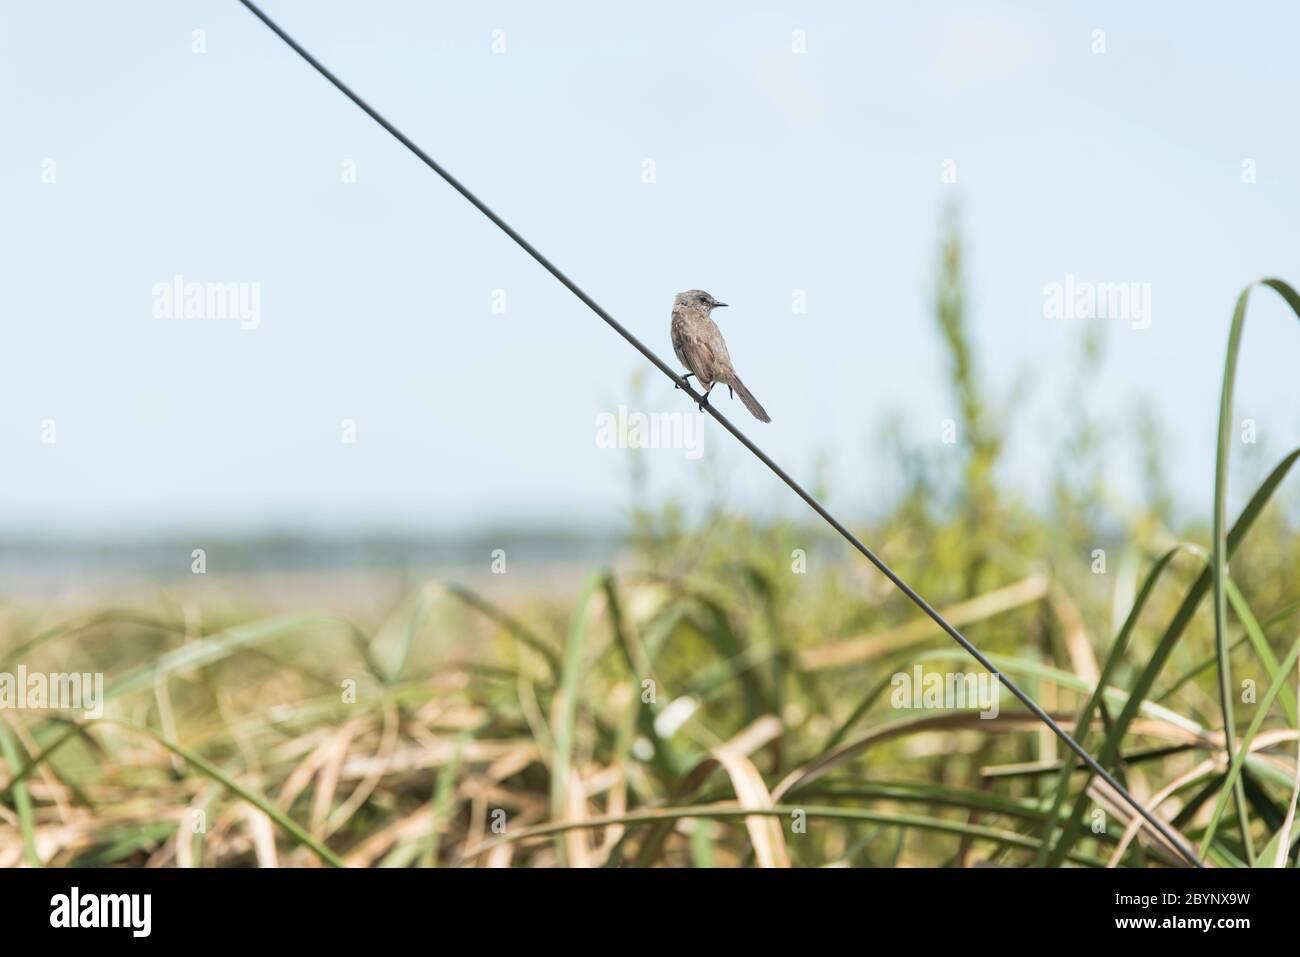 Sooty tyrannulet, Serpophaga nigricans, perched on a wire next to the Camino del Indio bird lookout, in Rocha, Uruguay Stock Photo